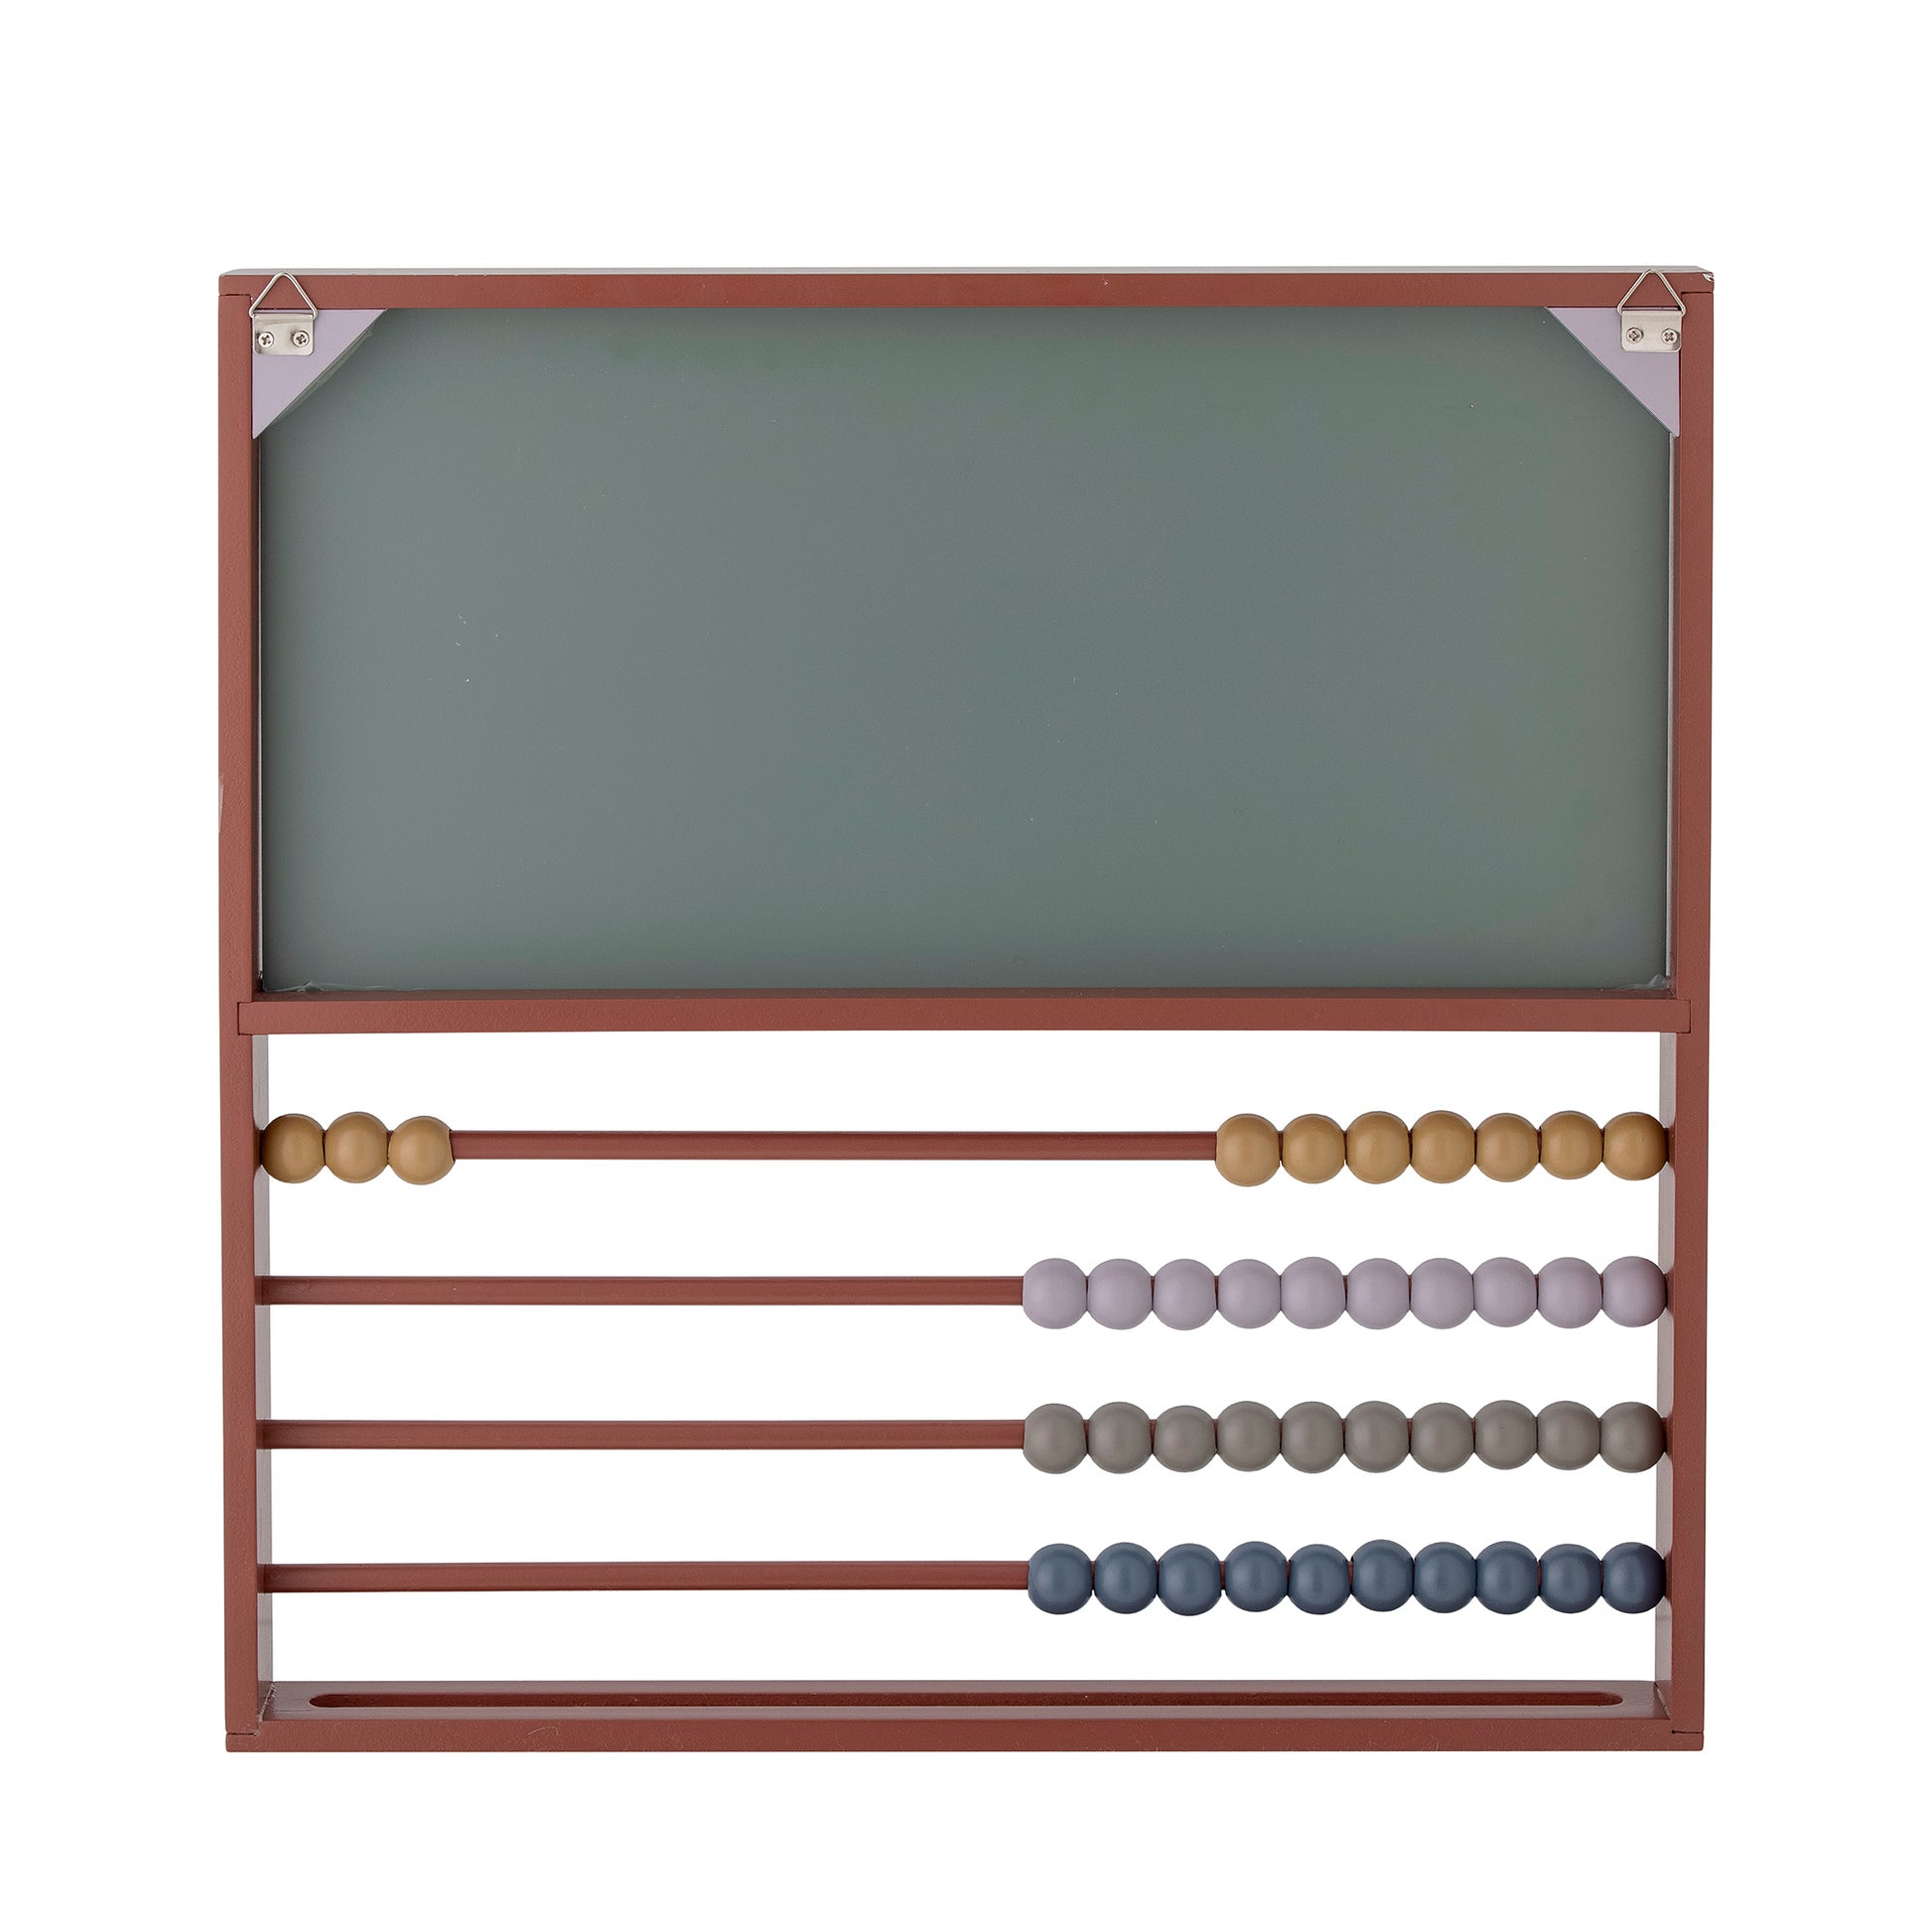 The Marcello Abacus from Bloomingville Mini in classic soft retro colors creates space for immersion and learning - or good role-playing  This product is FSC® certified.